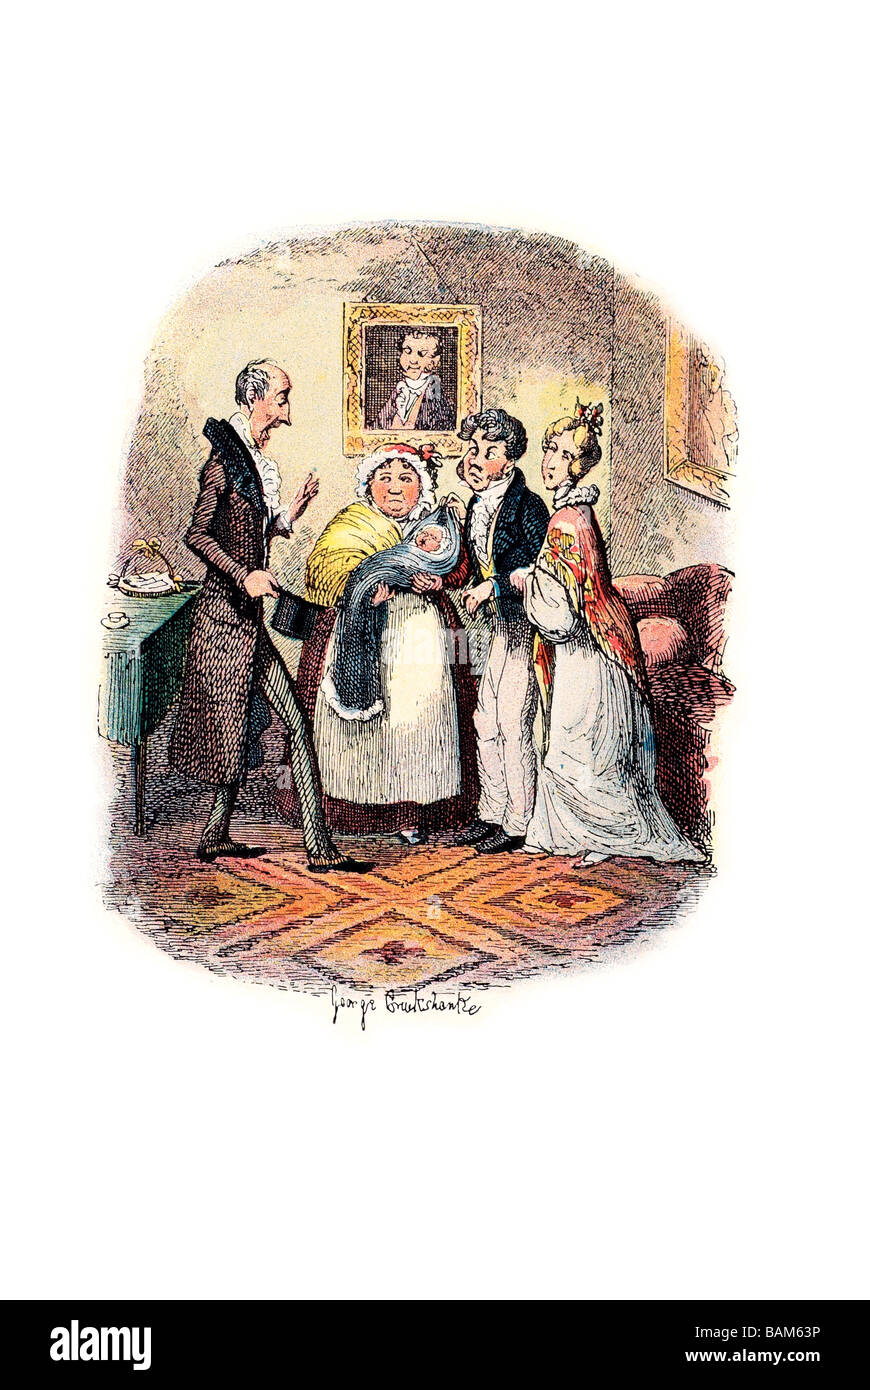 bloomsbury christening Hard Times - For These Times. is a novel by Charles Dickens, first published in 1854. Stock Photo